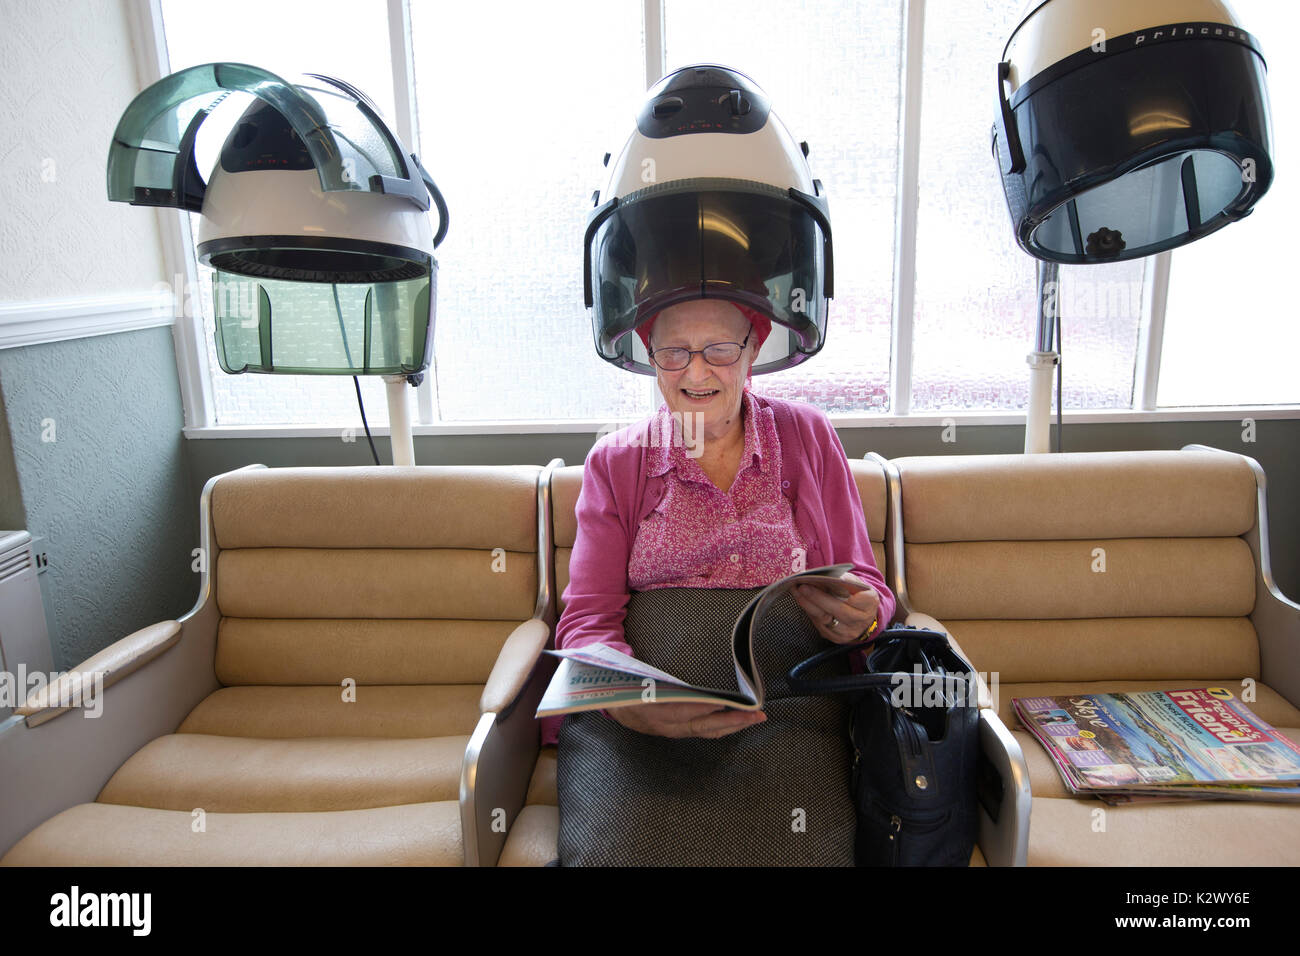 Elderly pensioner having her hair dried in a hood dryer wearing curlers at a ladies hairdresser's salon, England, United Kingdom Stock Photo